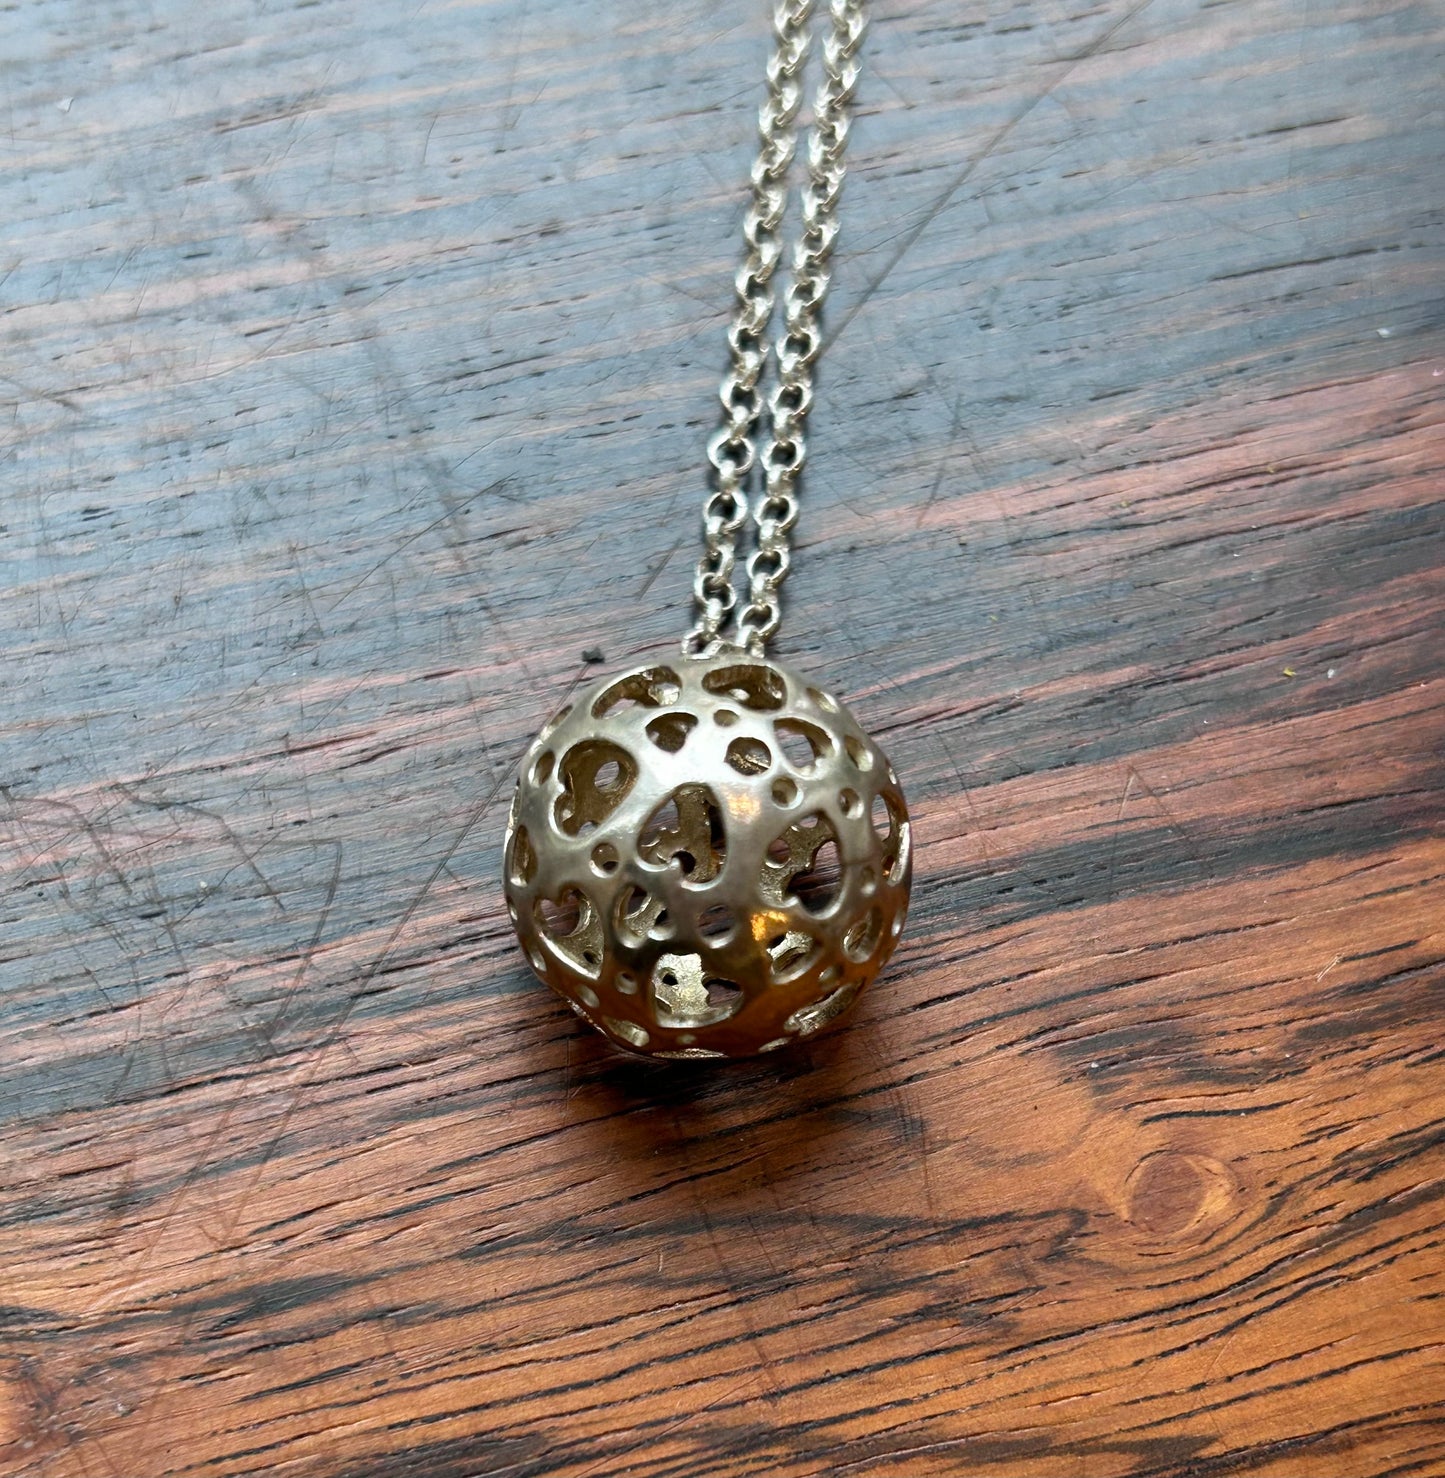 Spherical silver pendant with hearts - Vicson